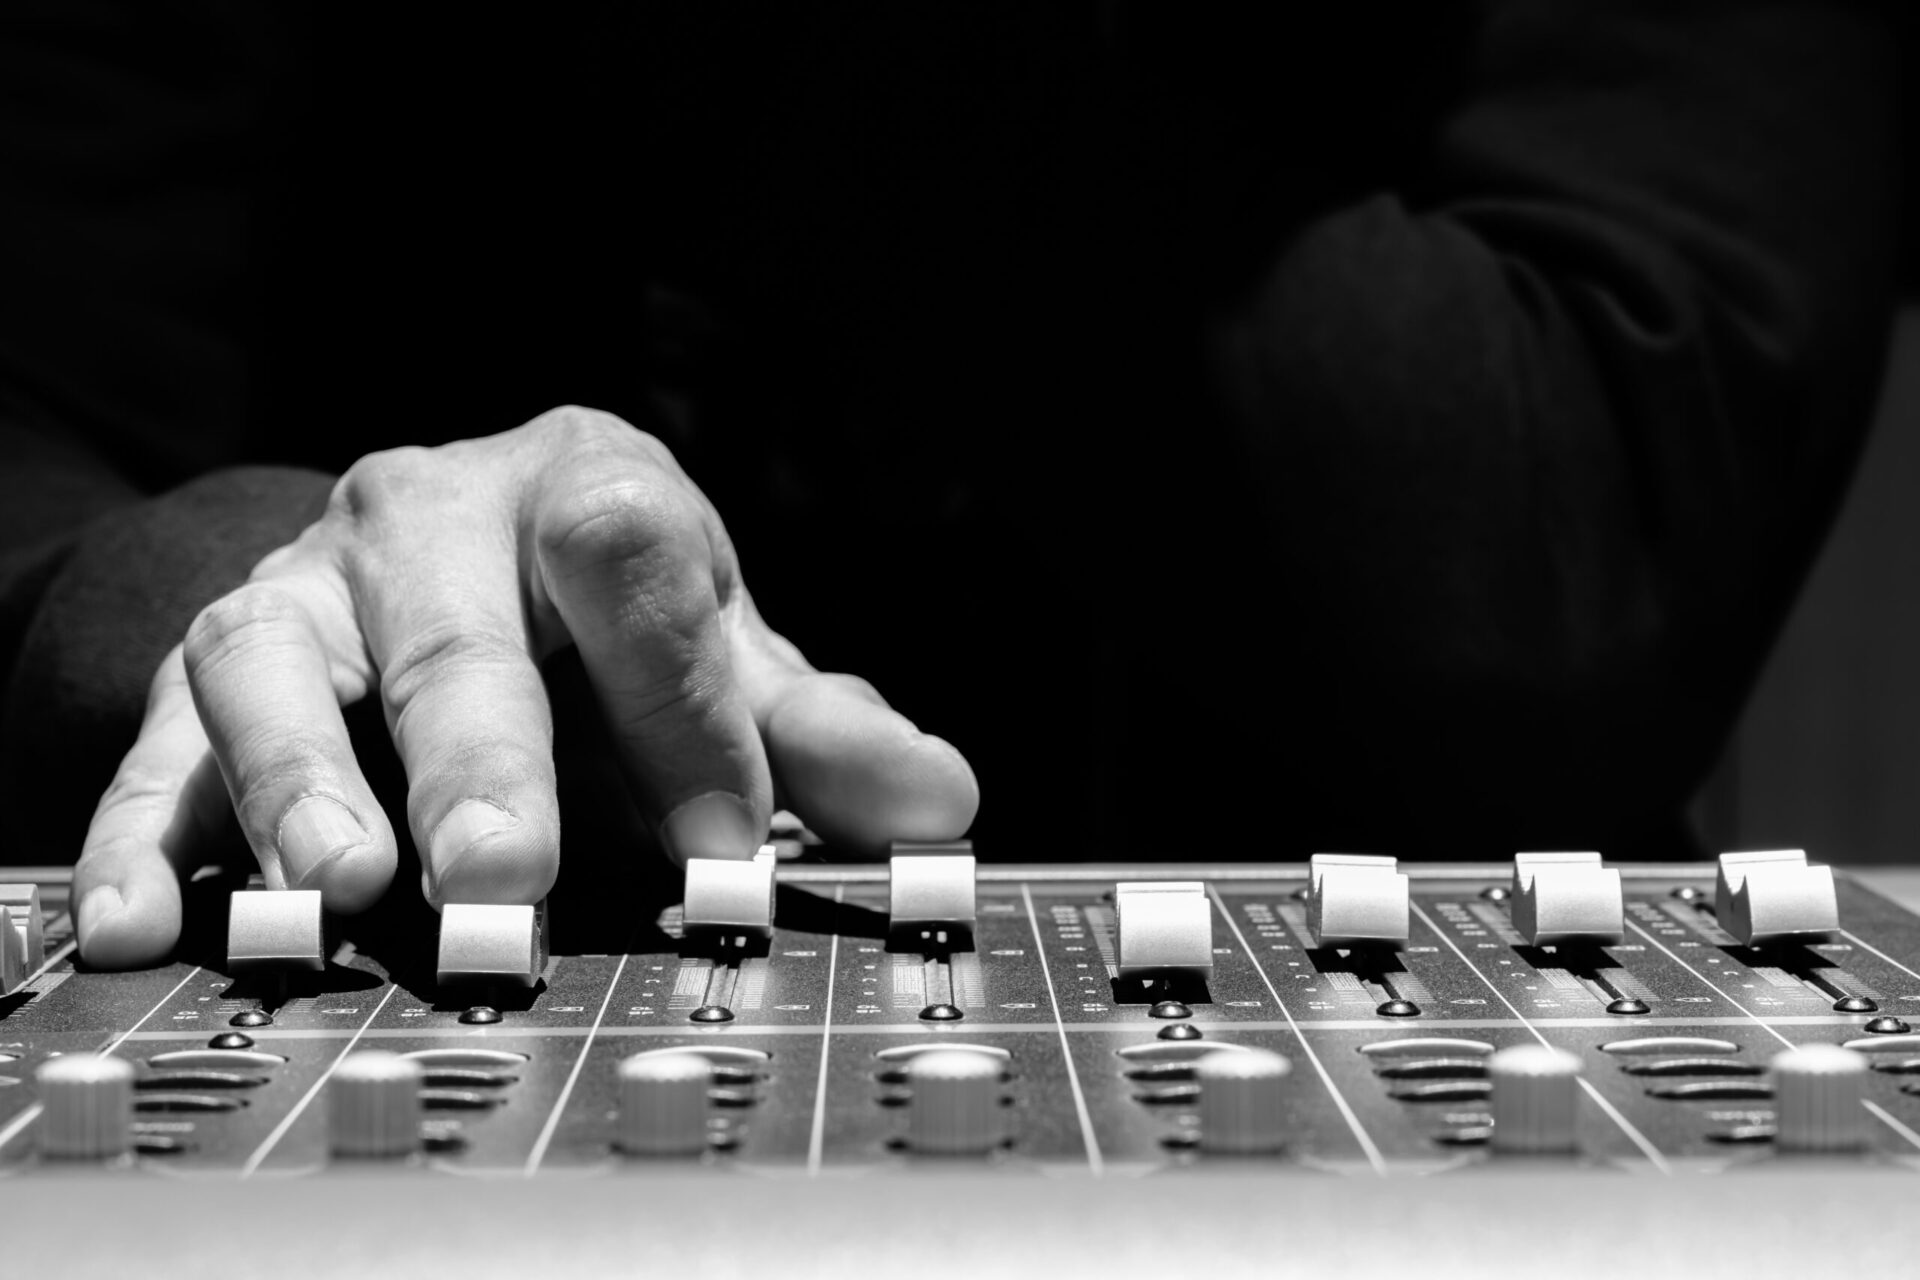 A monochrome portrait of an individual operating a mixing board, illustrating possible pricing and package options.